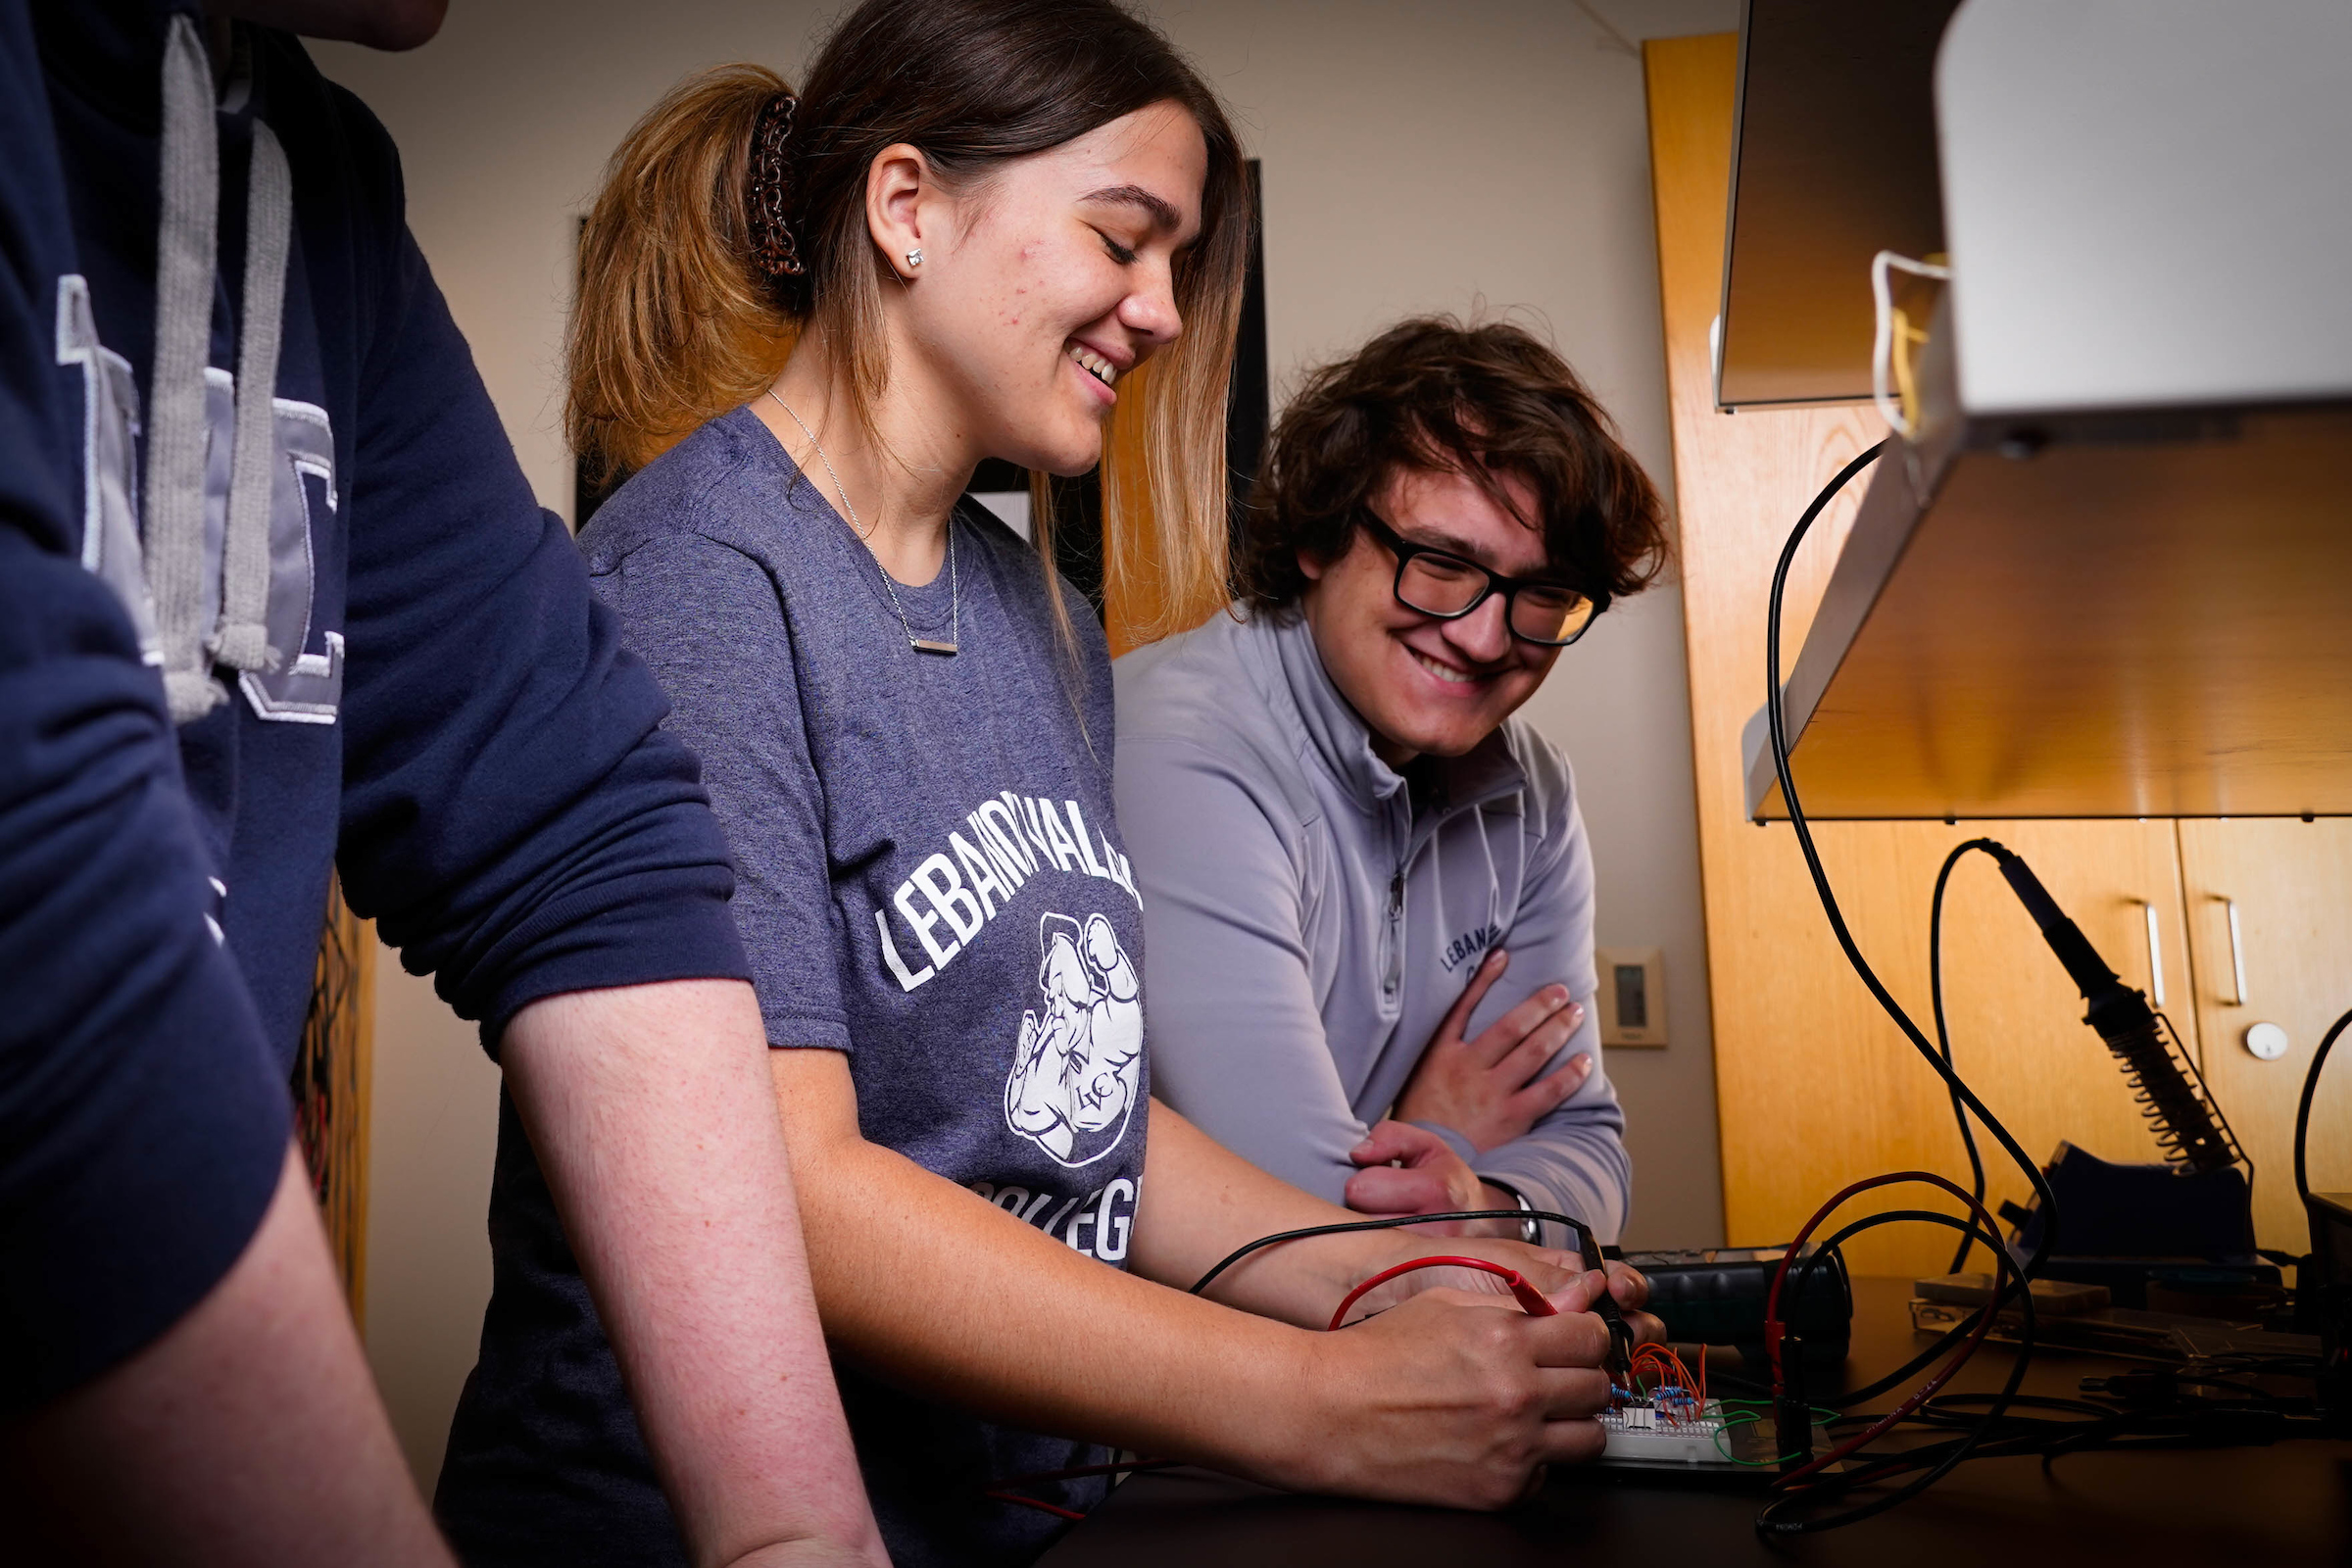 Research First physics students Faye Gibson (left), Michael Harris (right) in lab